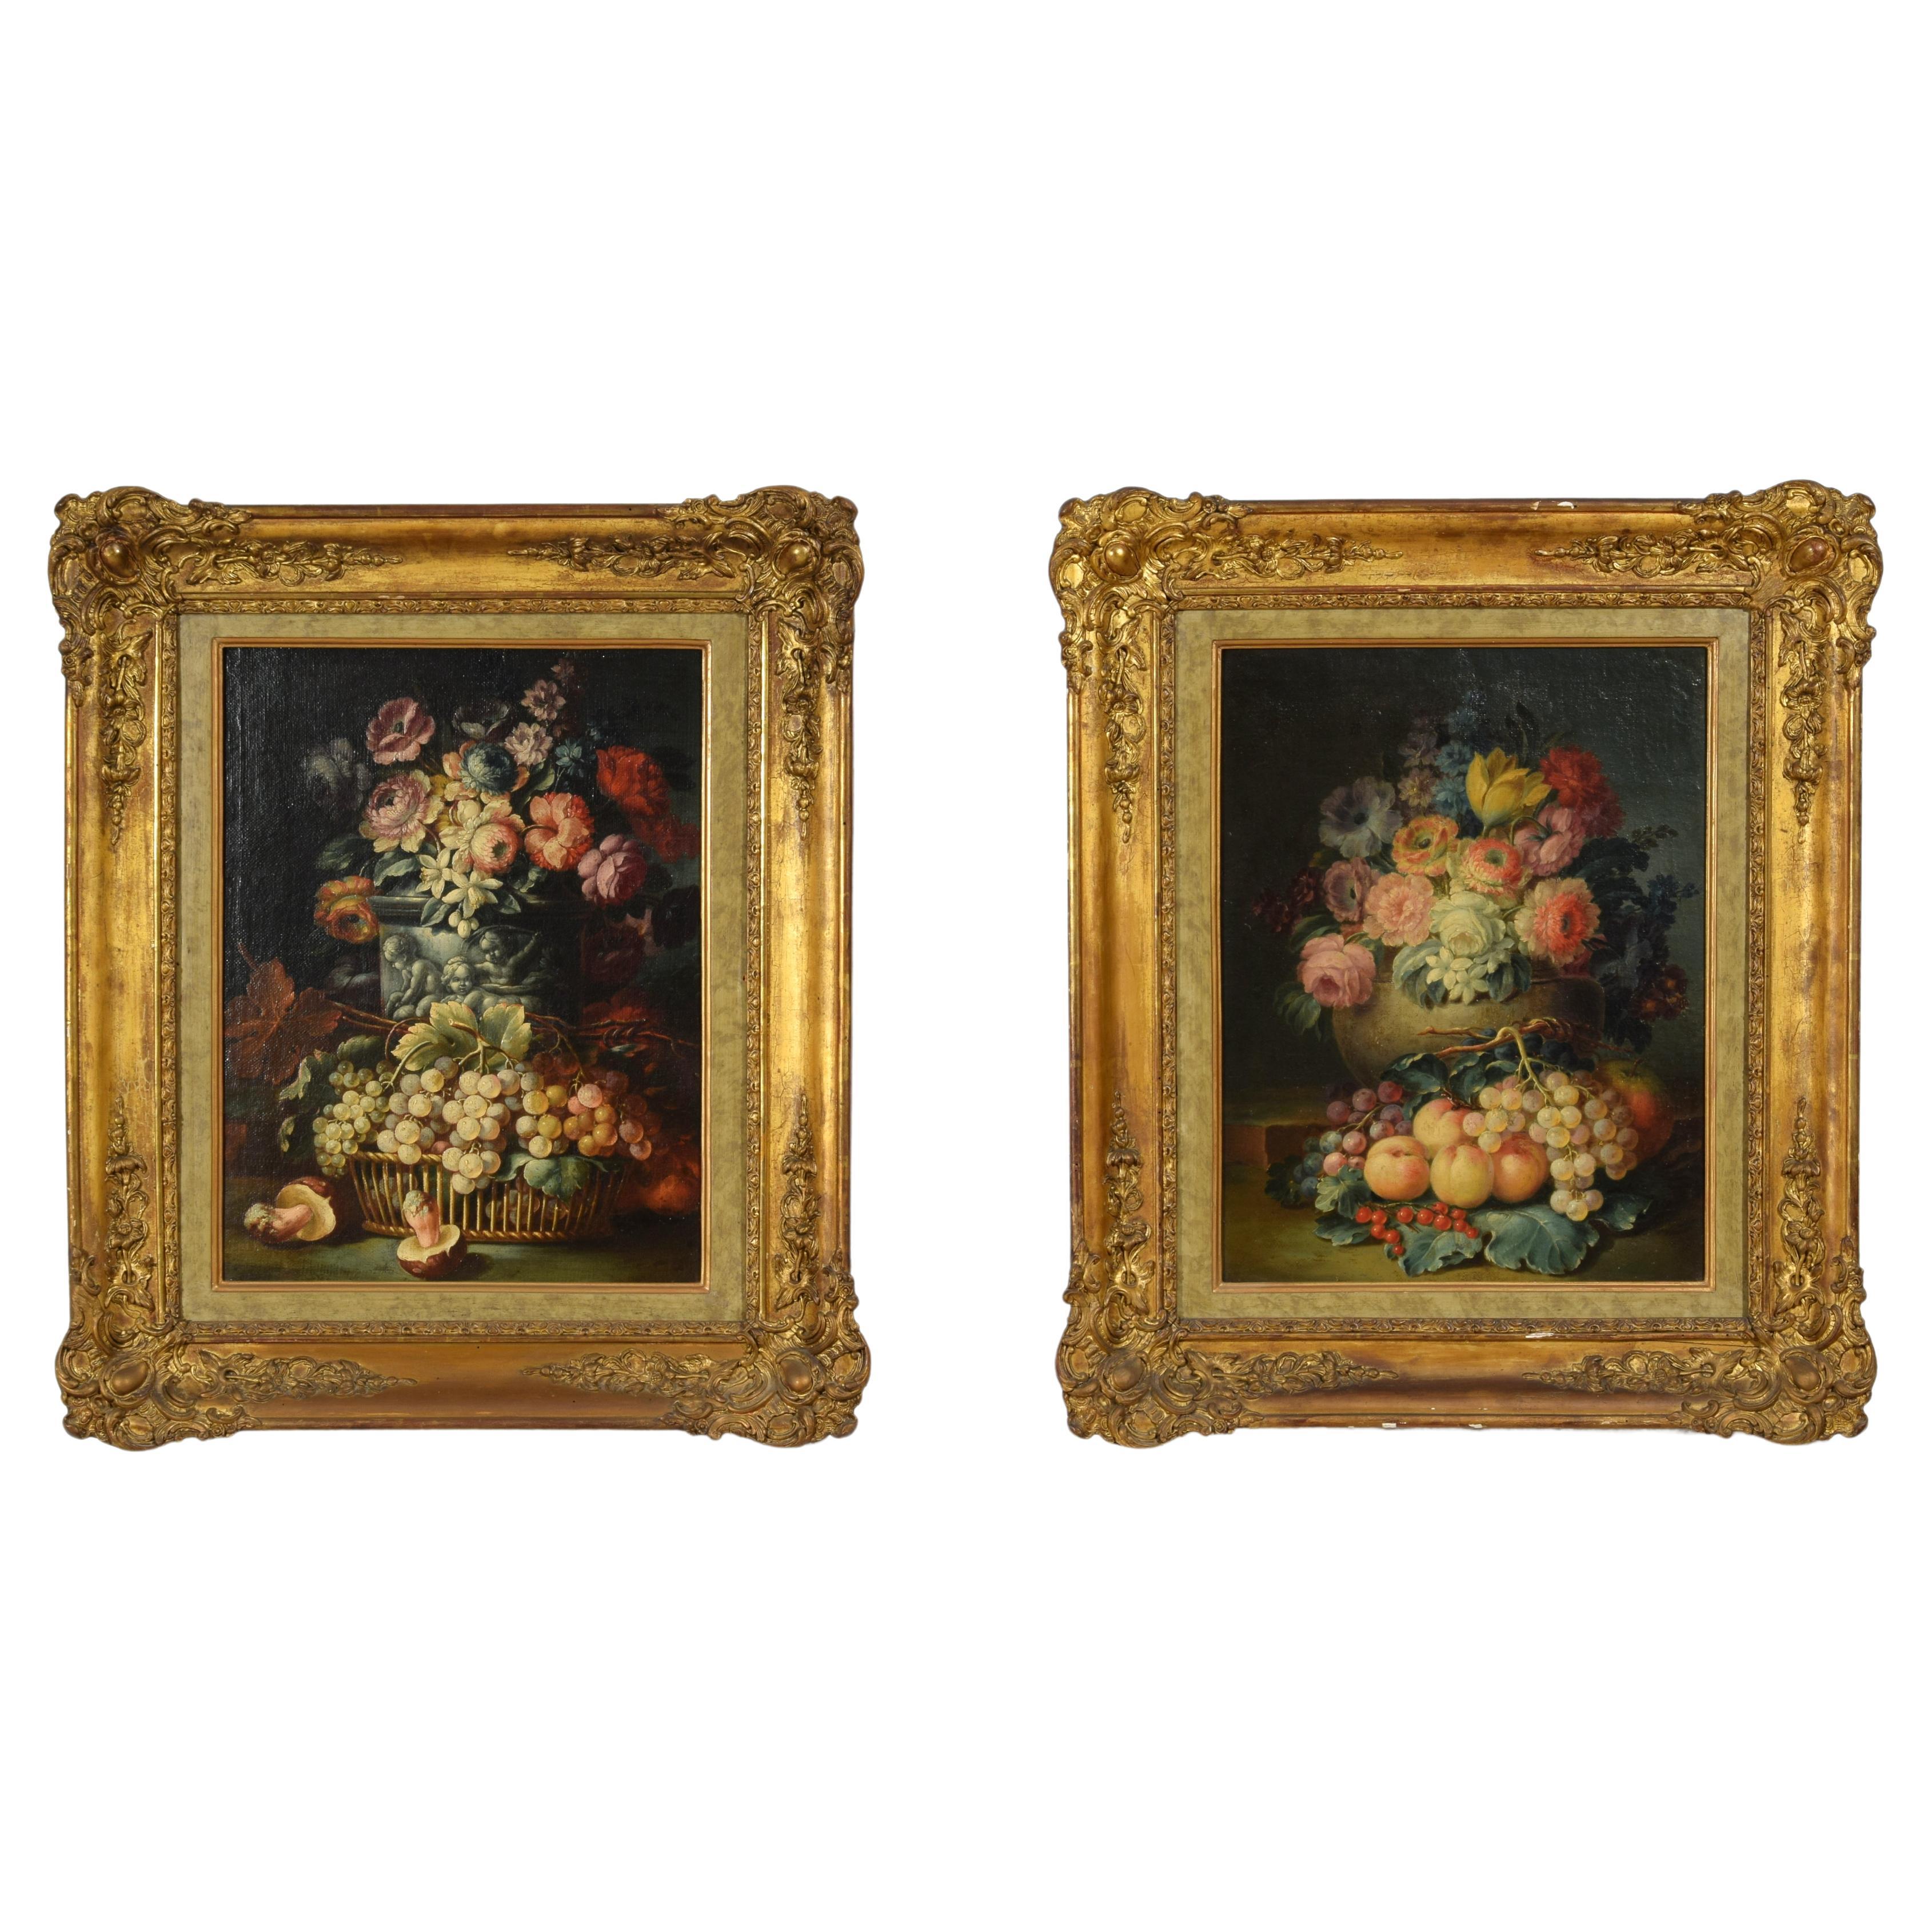 18th Century, Two Still Lifes with Flowers and Fruits by Italian Paintings